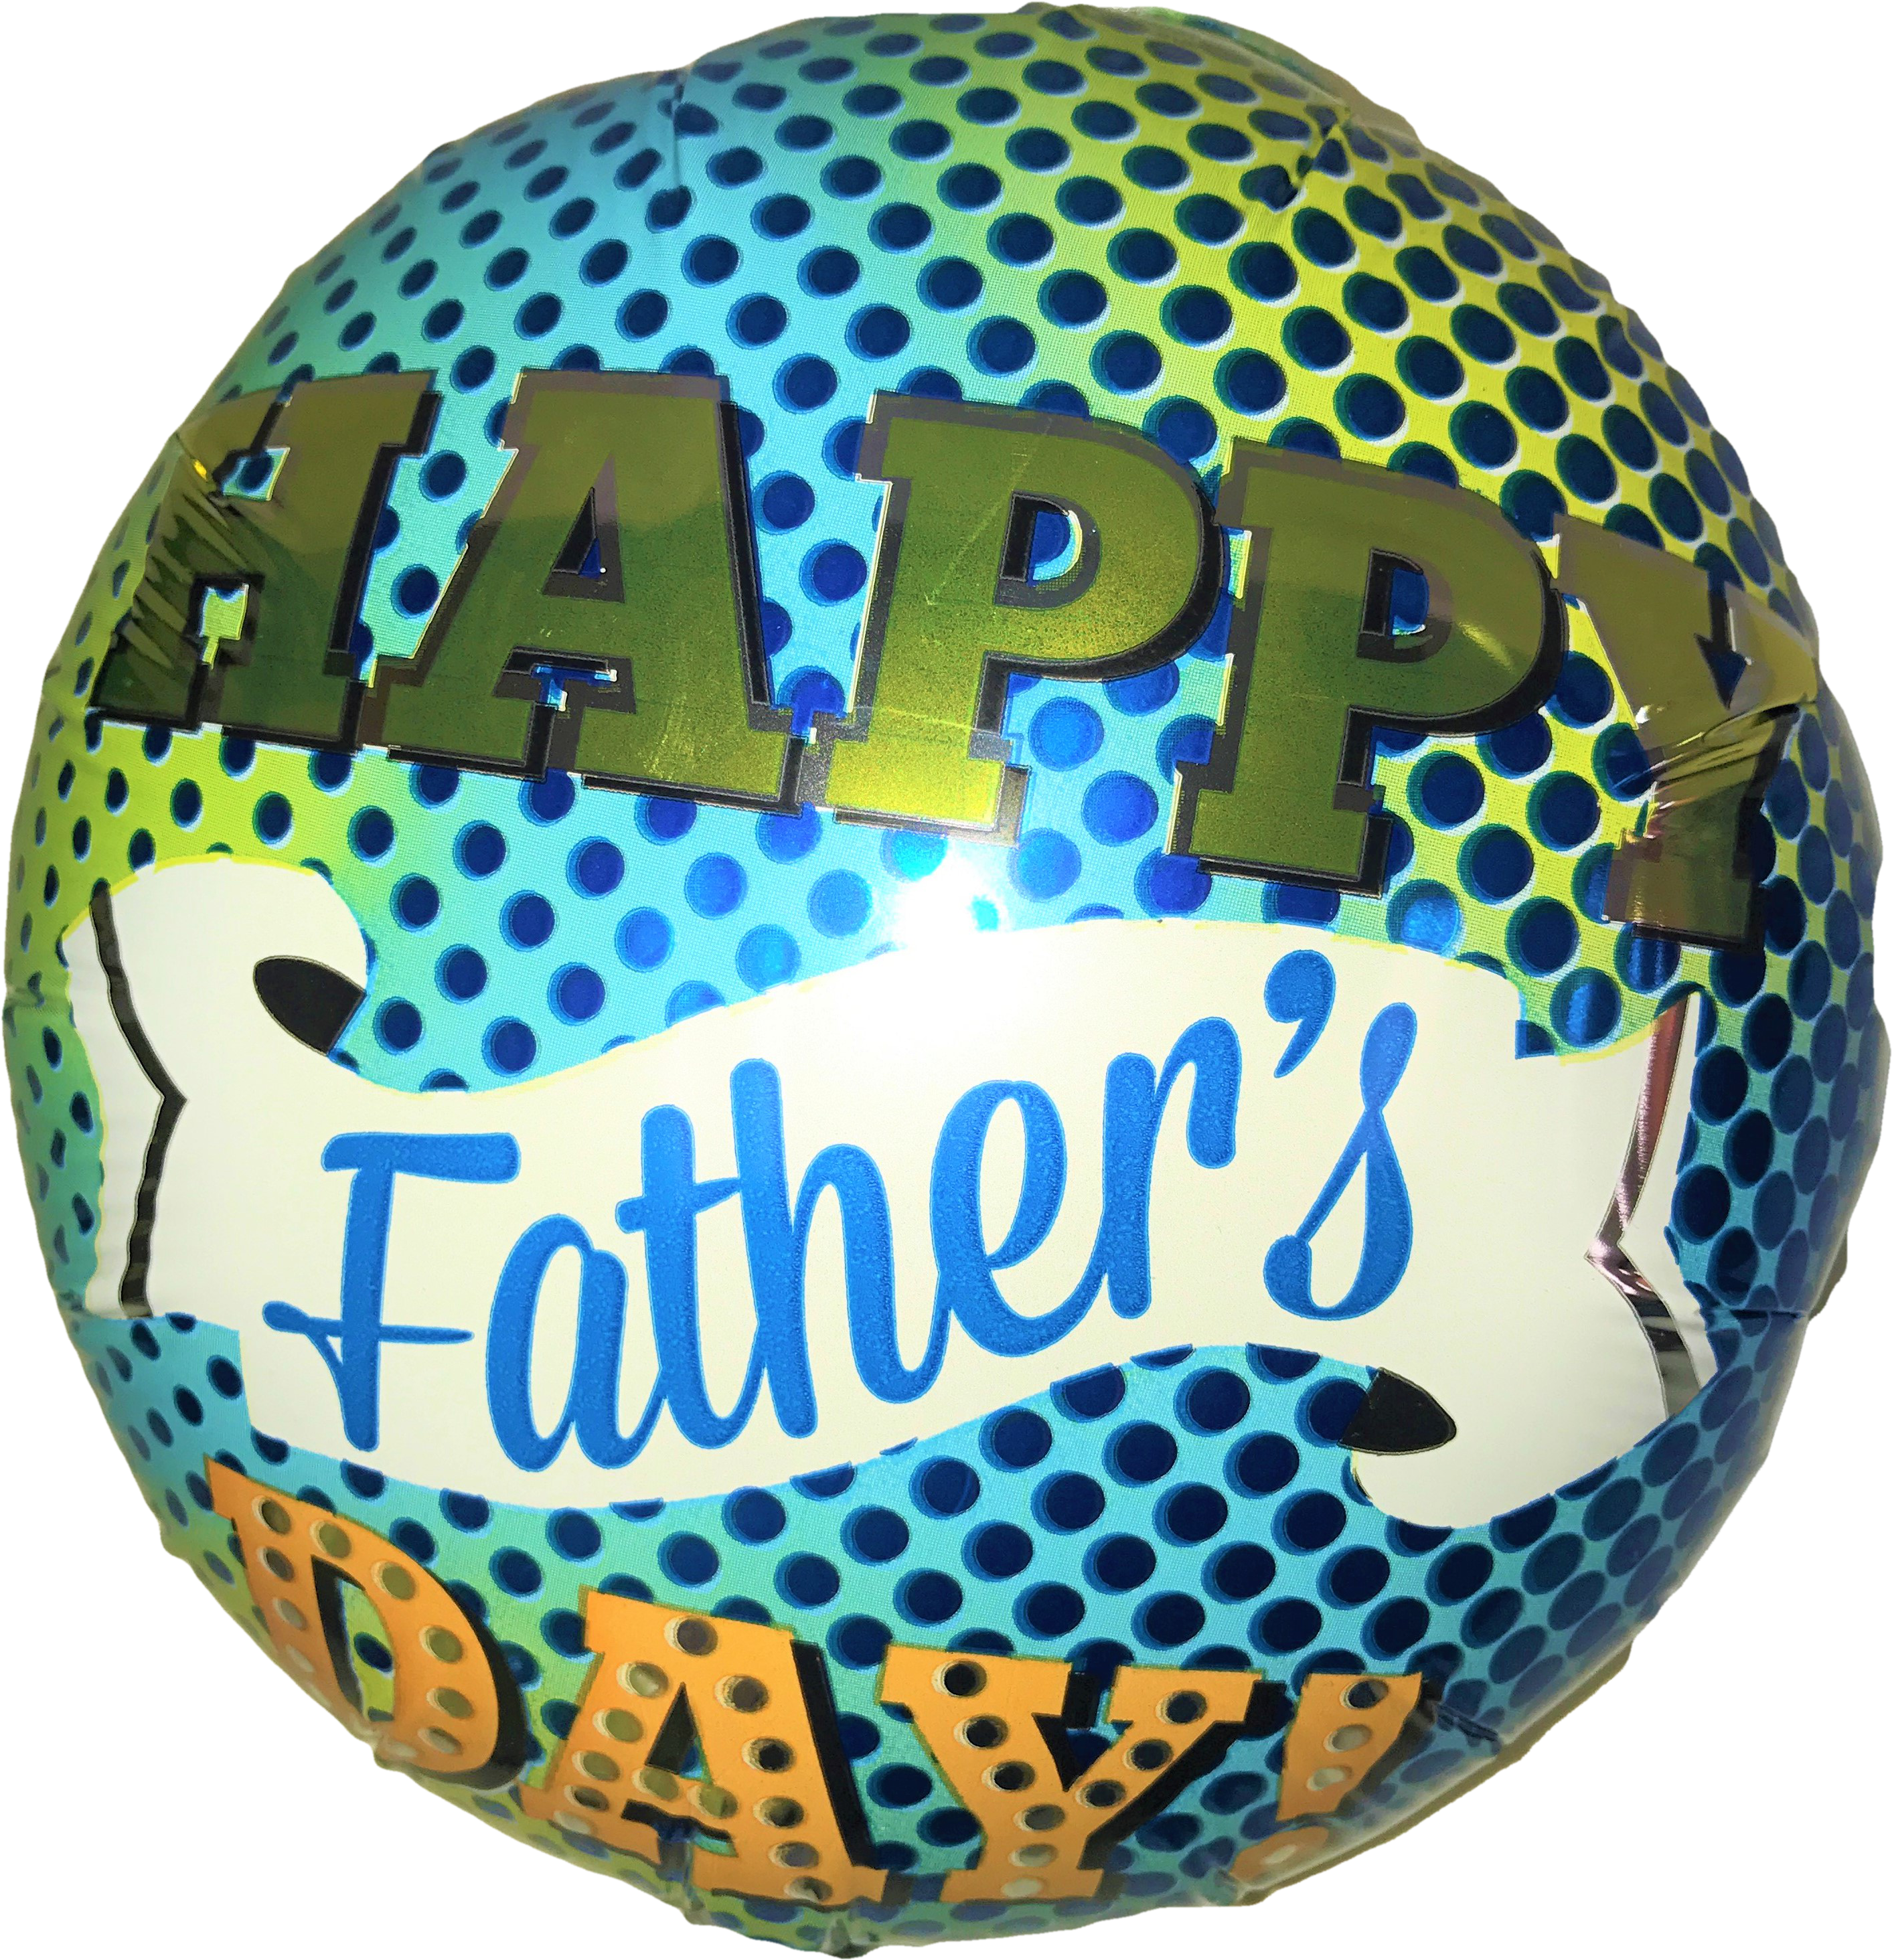 Fathers Day Celebration Balloon PNG